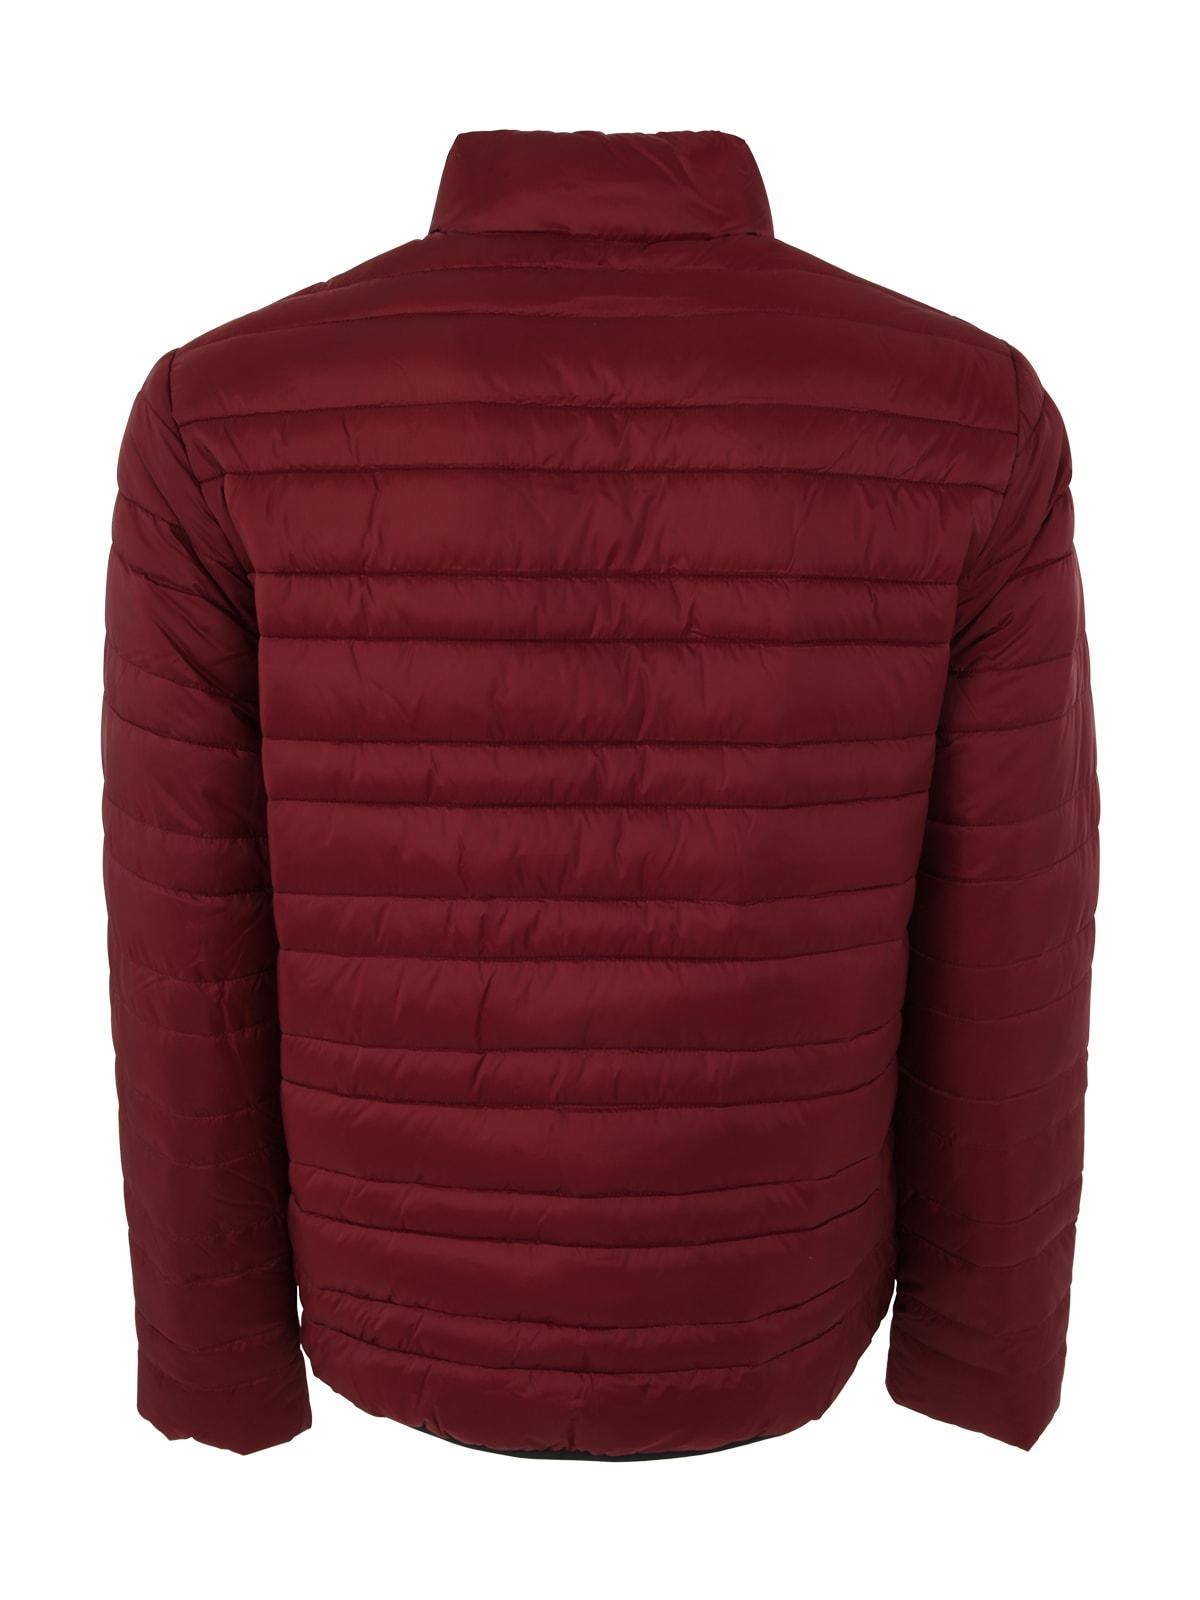 Michael Kors Outerwear Jacket in Red for Men | Lyst